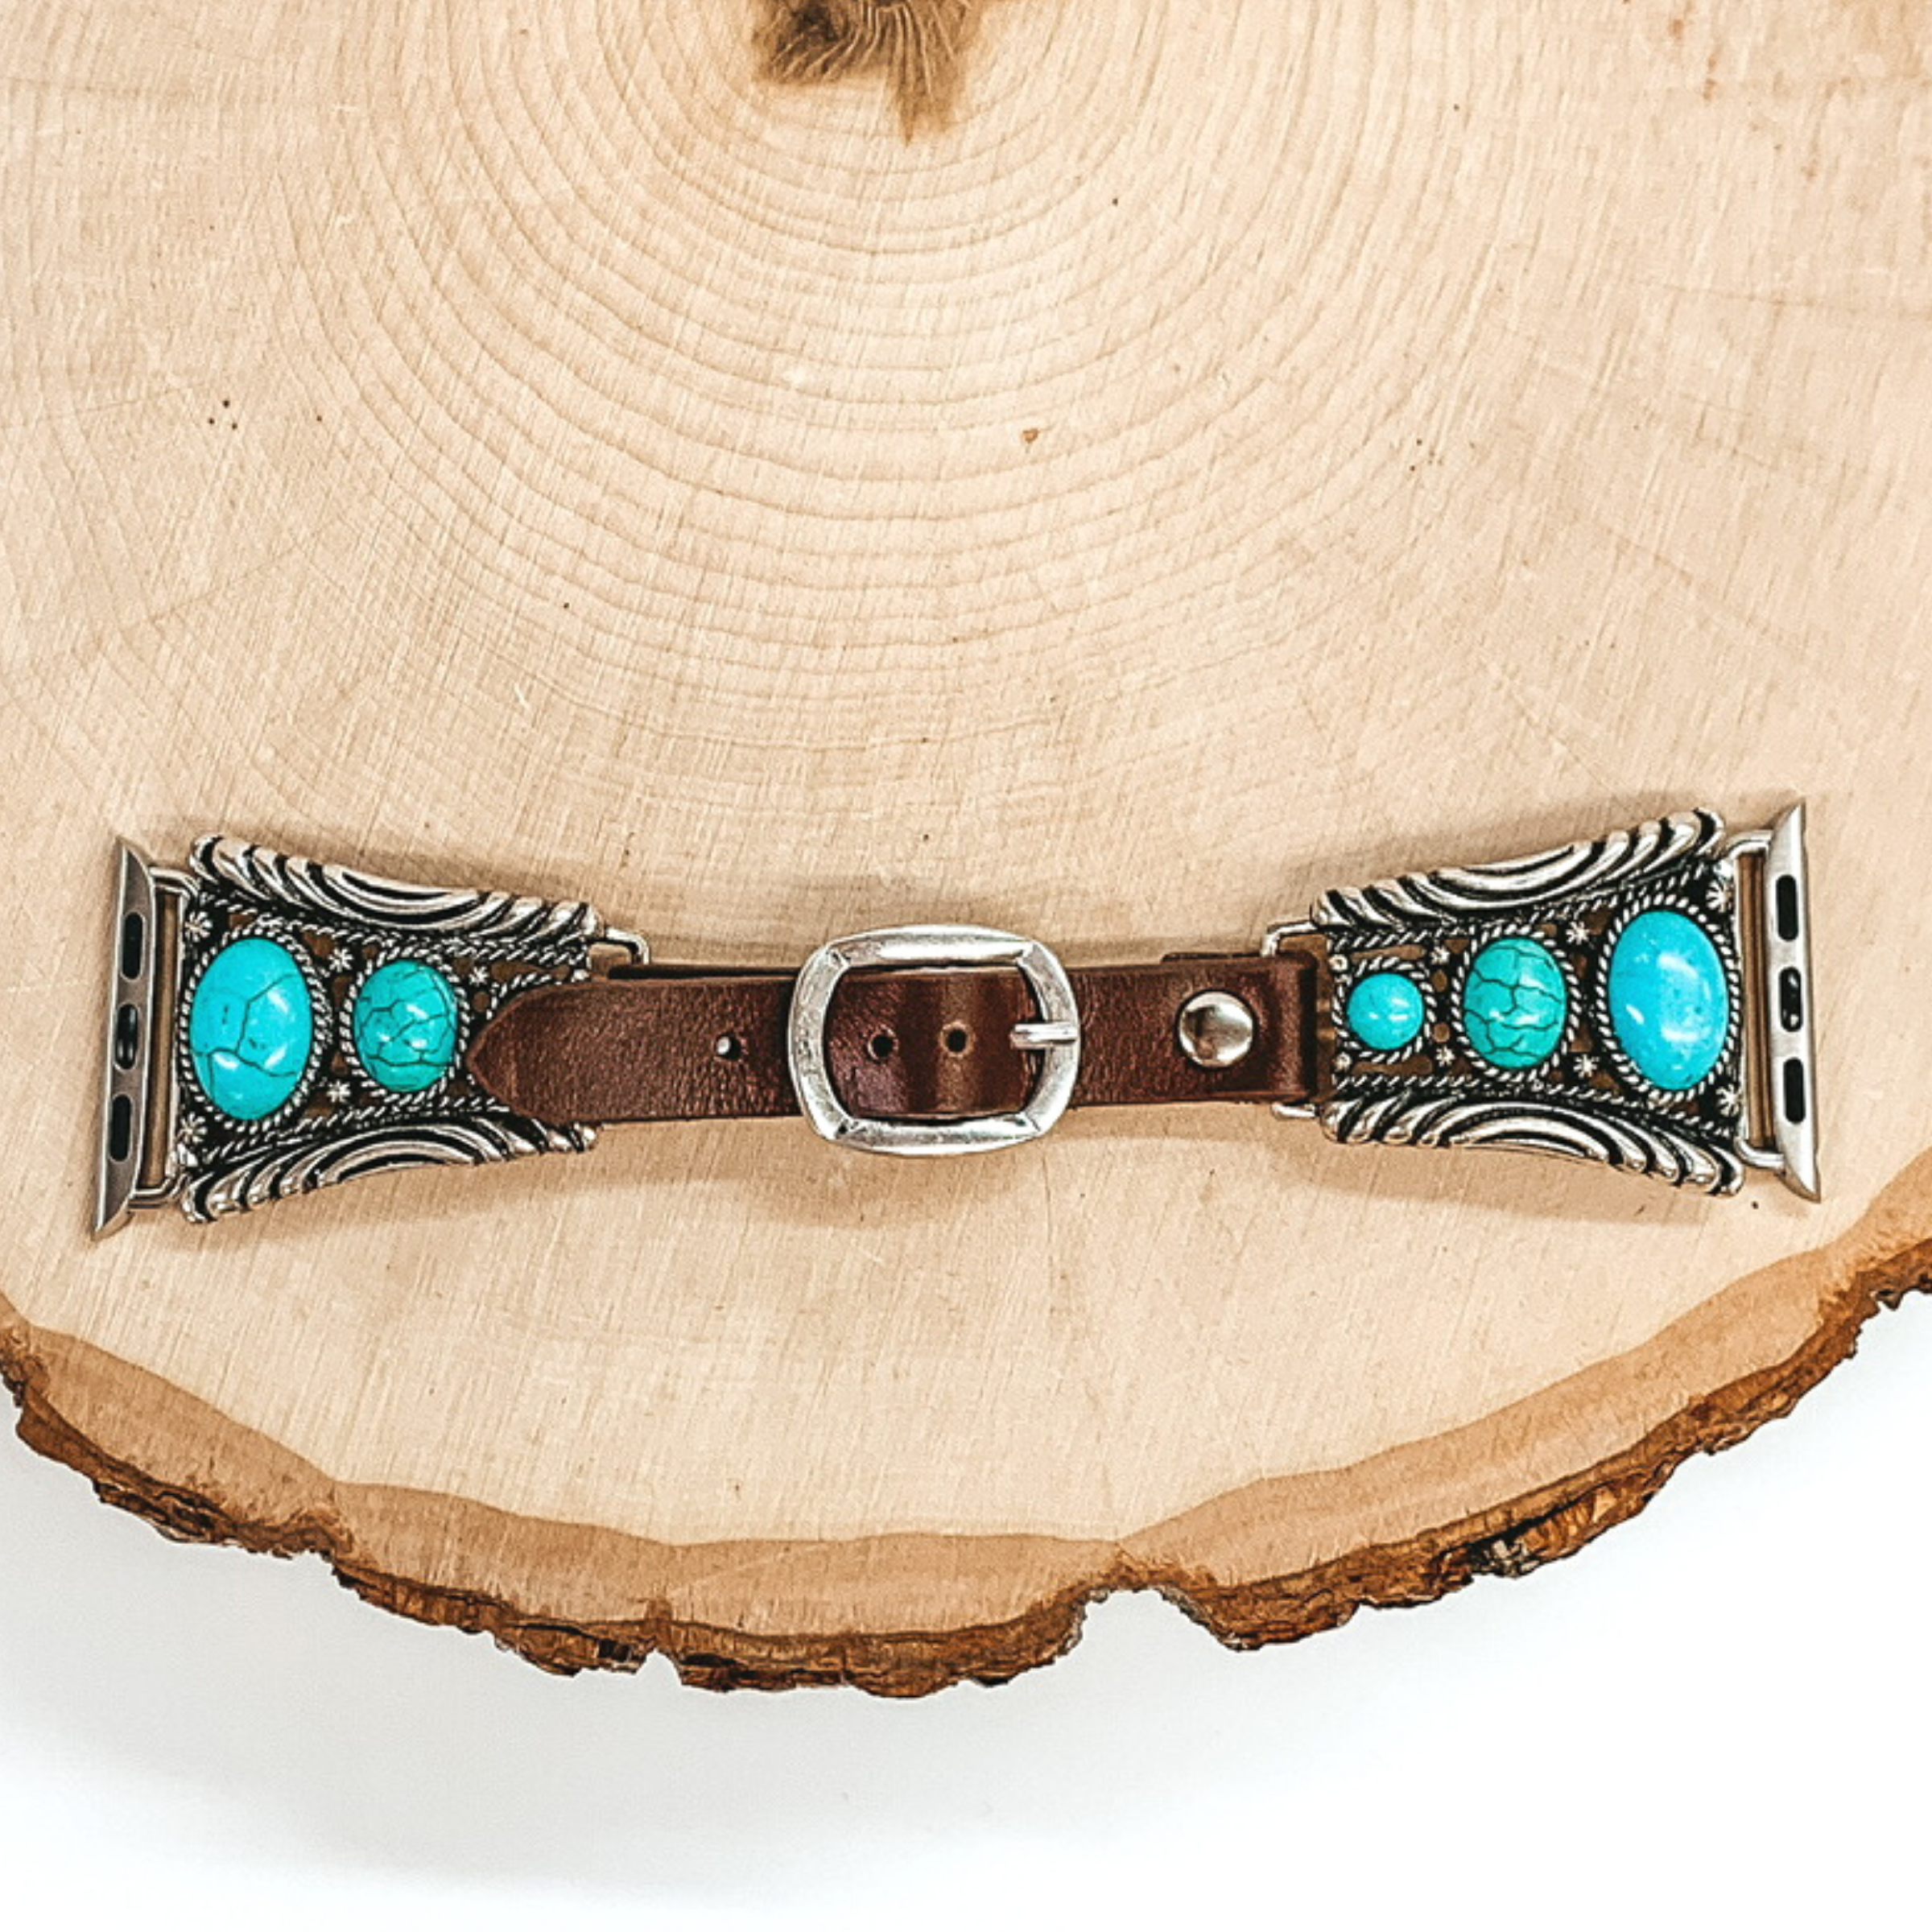 Dark Brown watch band with silver, trapesoid shaped ends with Apple watch band acessories. The ends have three turquoise stones each going from biggest to smallest. This watch band is pictured on a piece of wood on a white background.